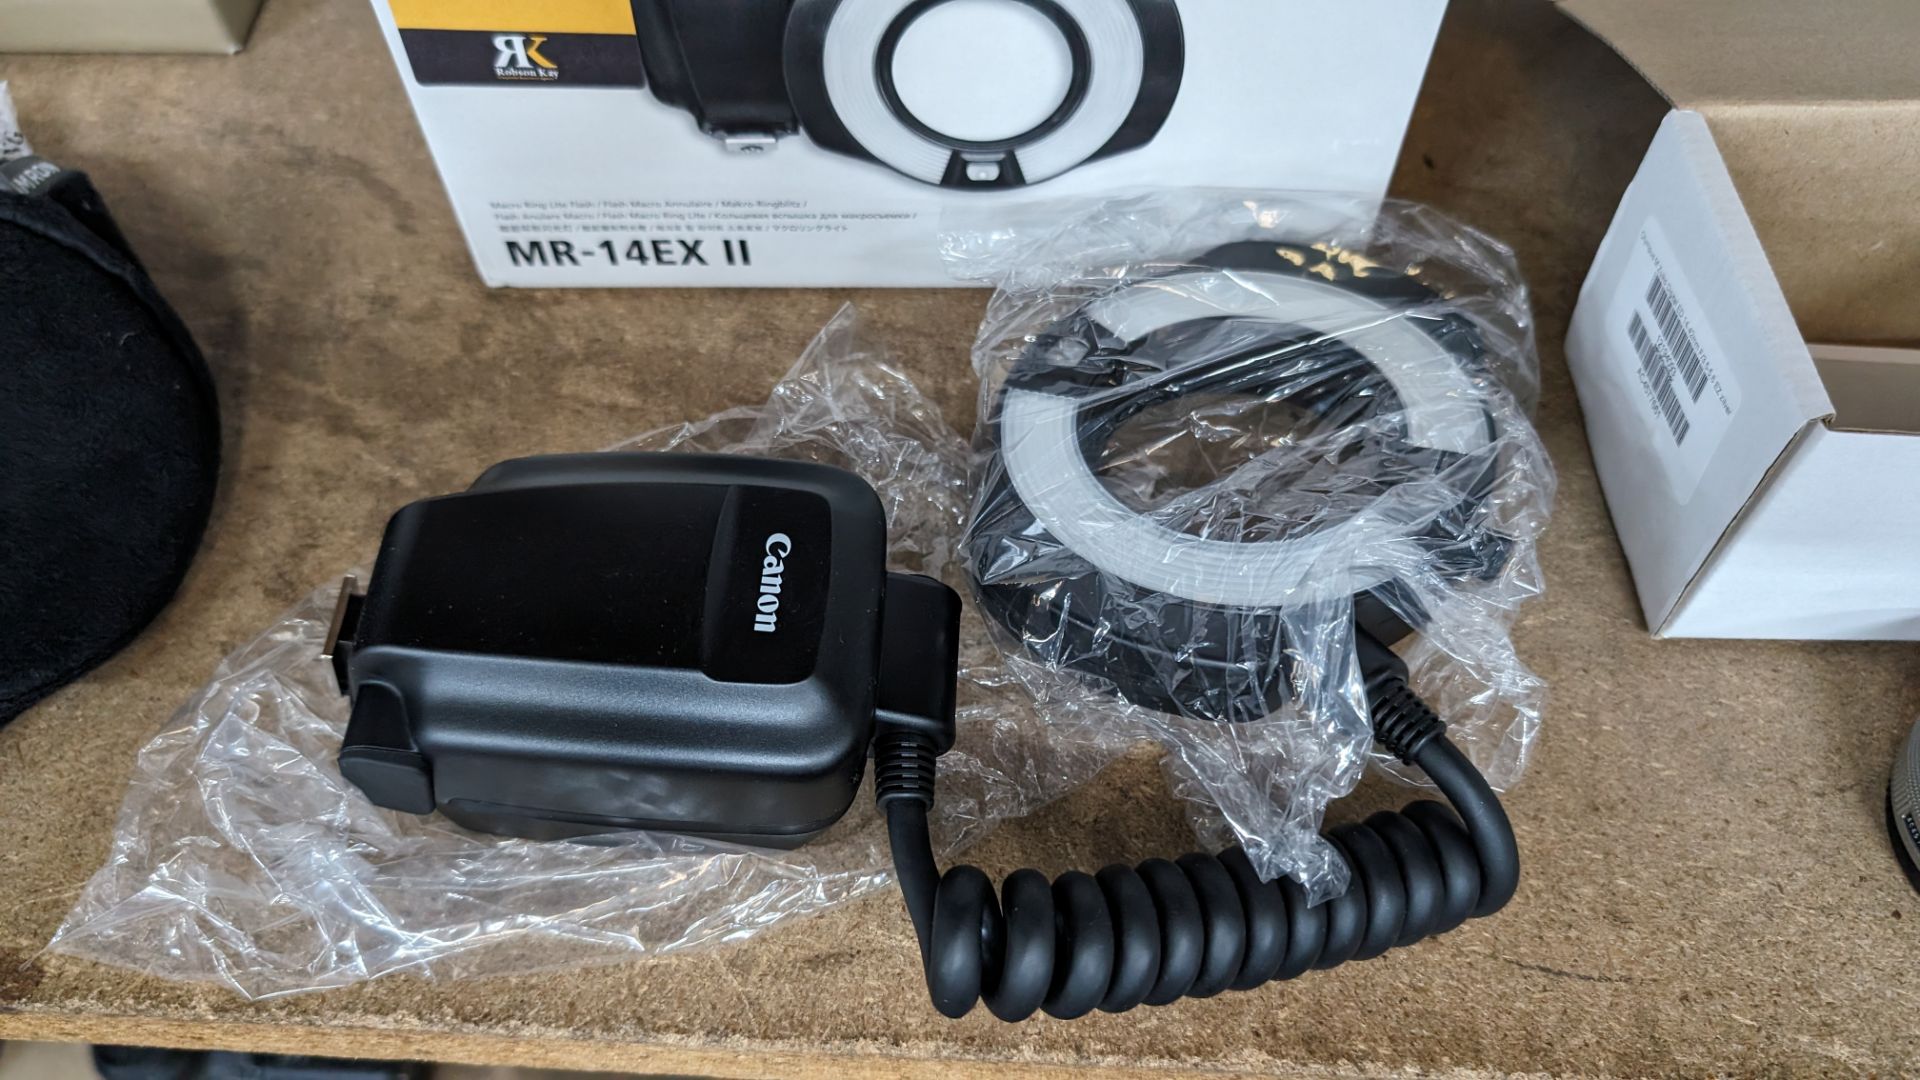 Canon MR-14EX II macro ring light flash. Includes soft carry case - Image 4 of 7